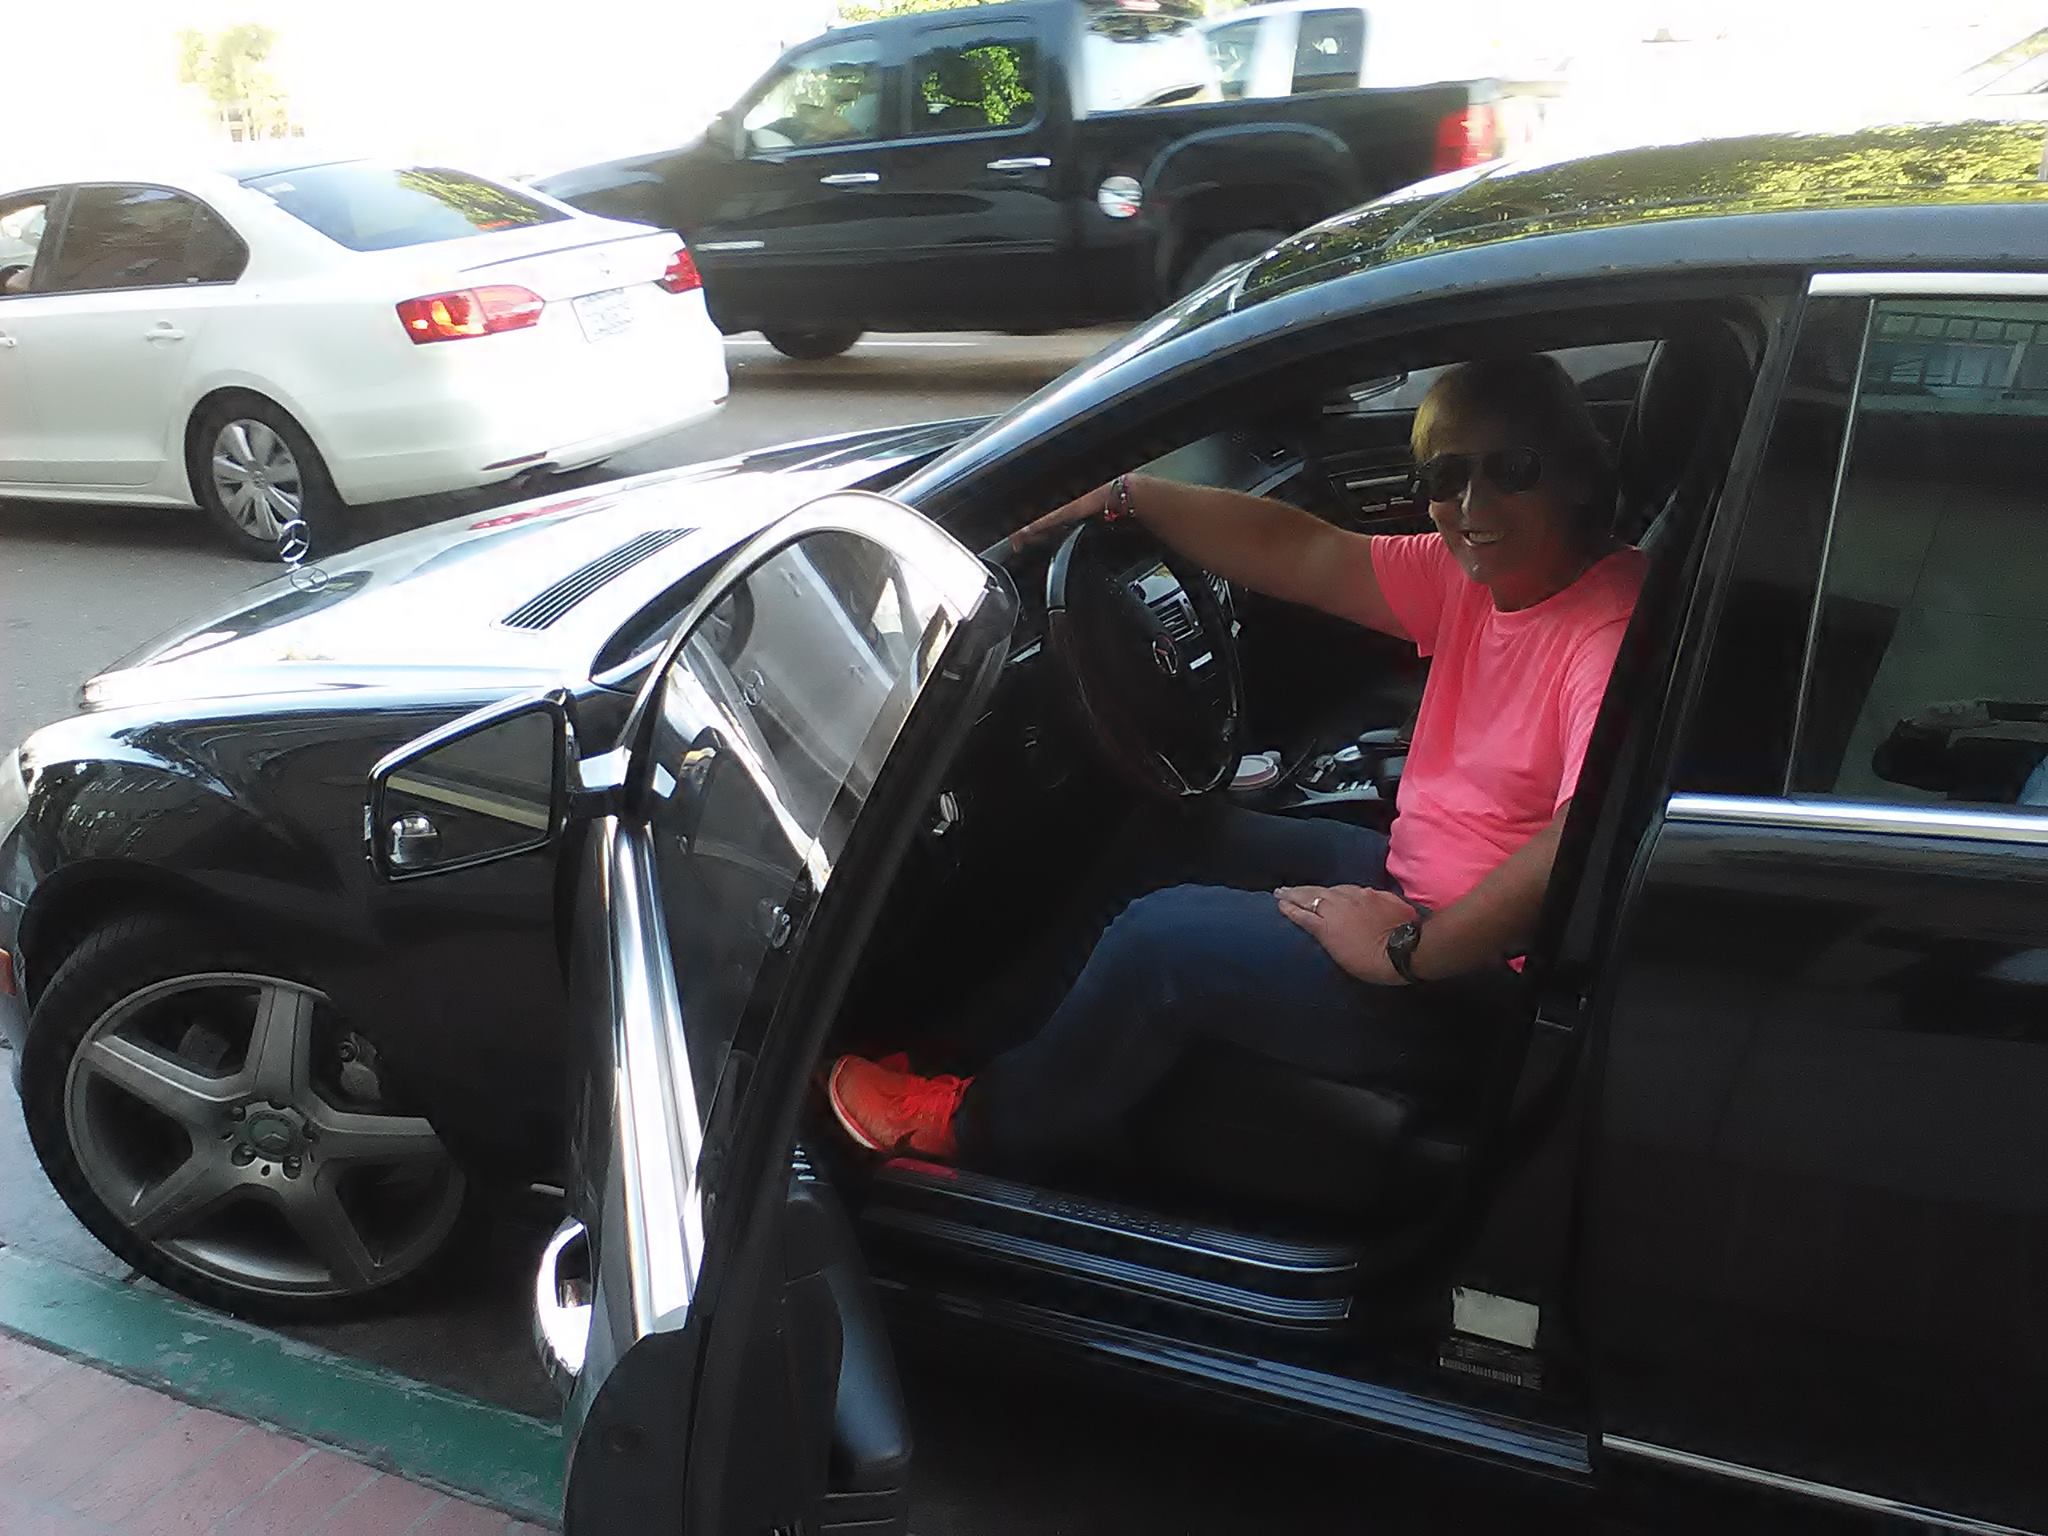 Here's me in a $125,000 Mercedes. It is owned by a man from La Jolla who use to drive Michael Jackson. He's my driver as soon as I need one. I'm paying him $150K+ year.